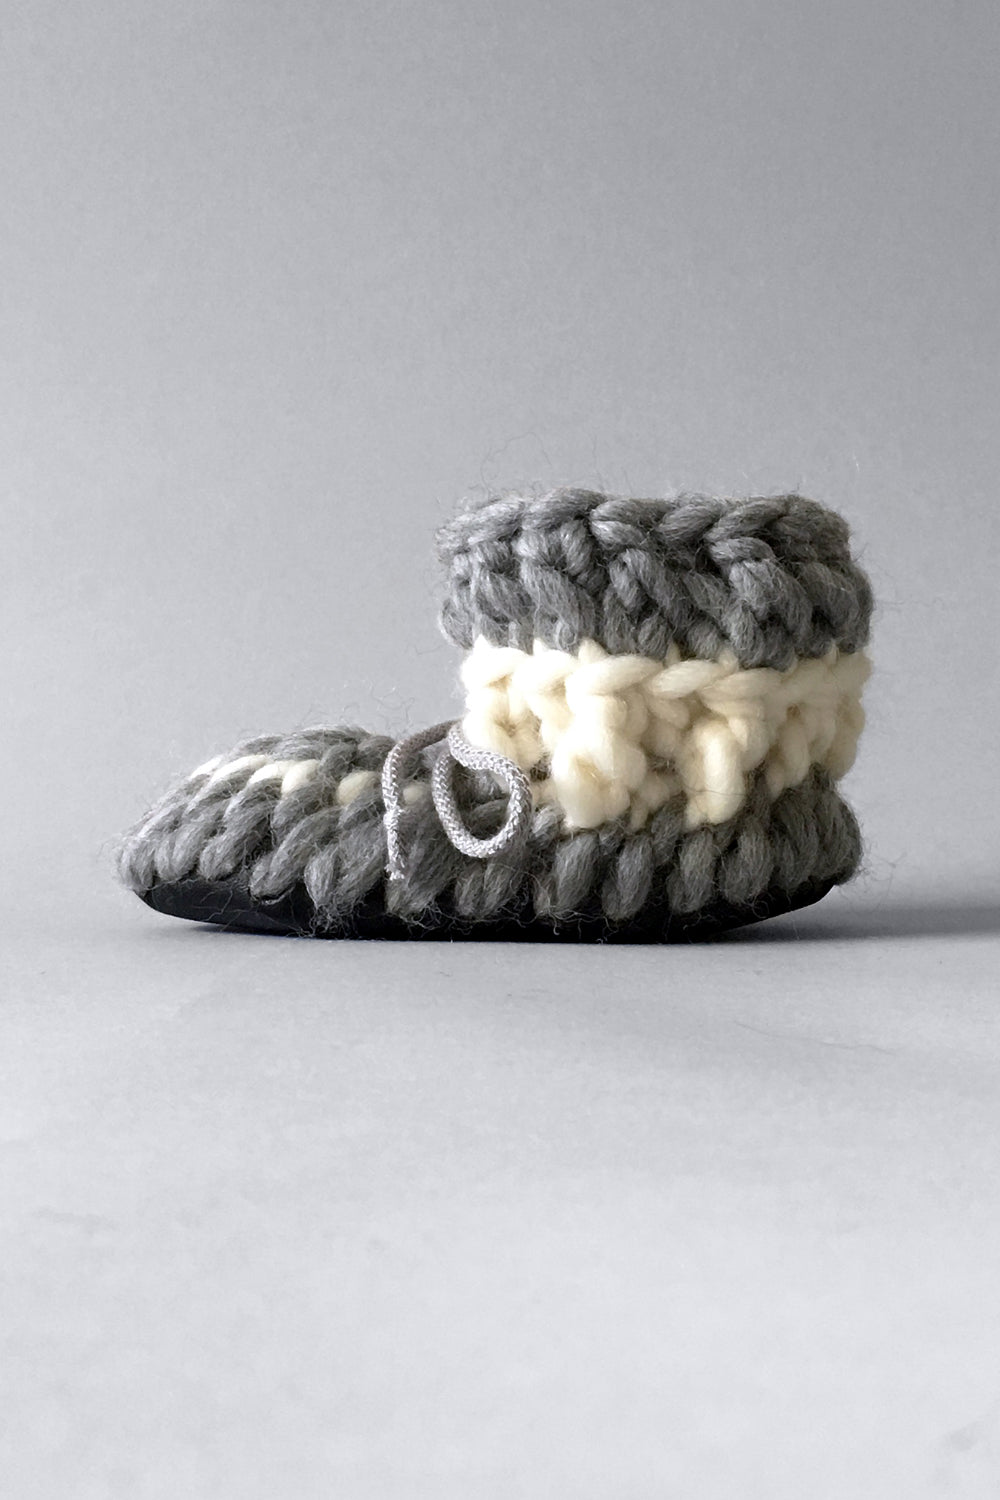 merino wool baby booties with leather sole, gray slipper booties for kids